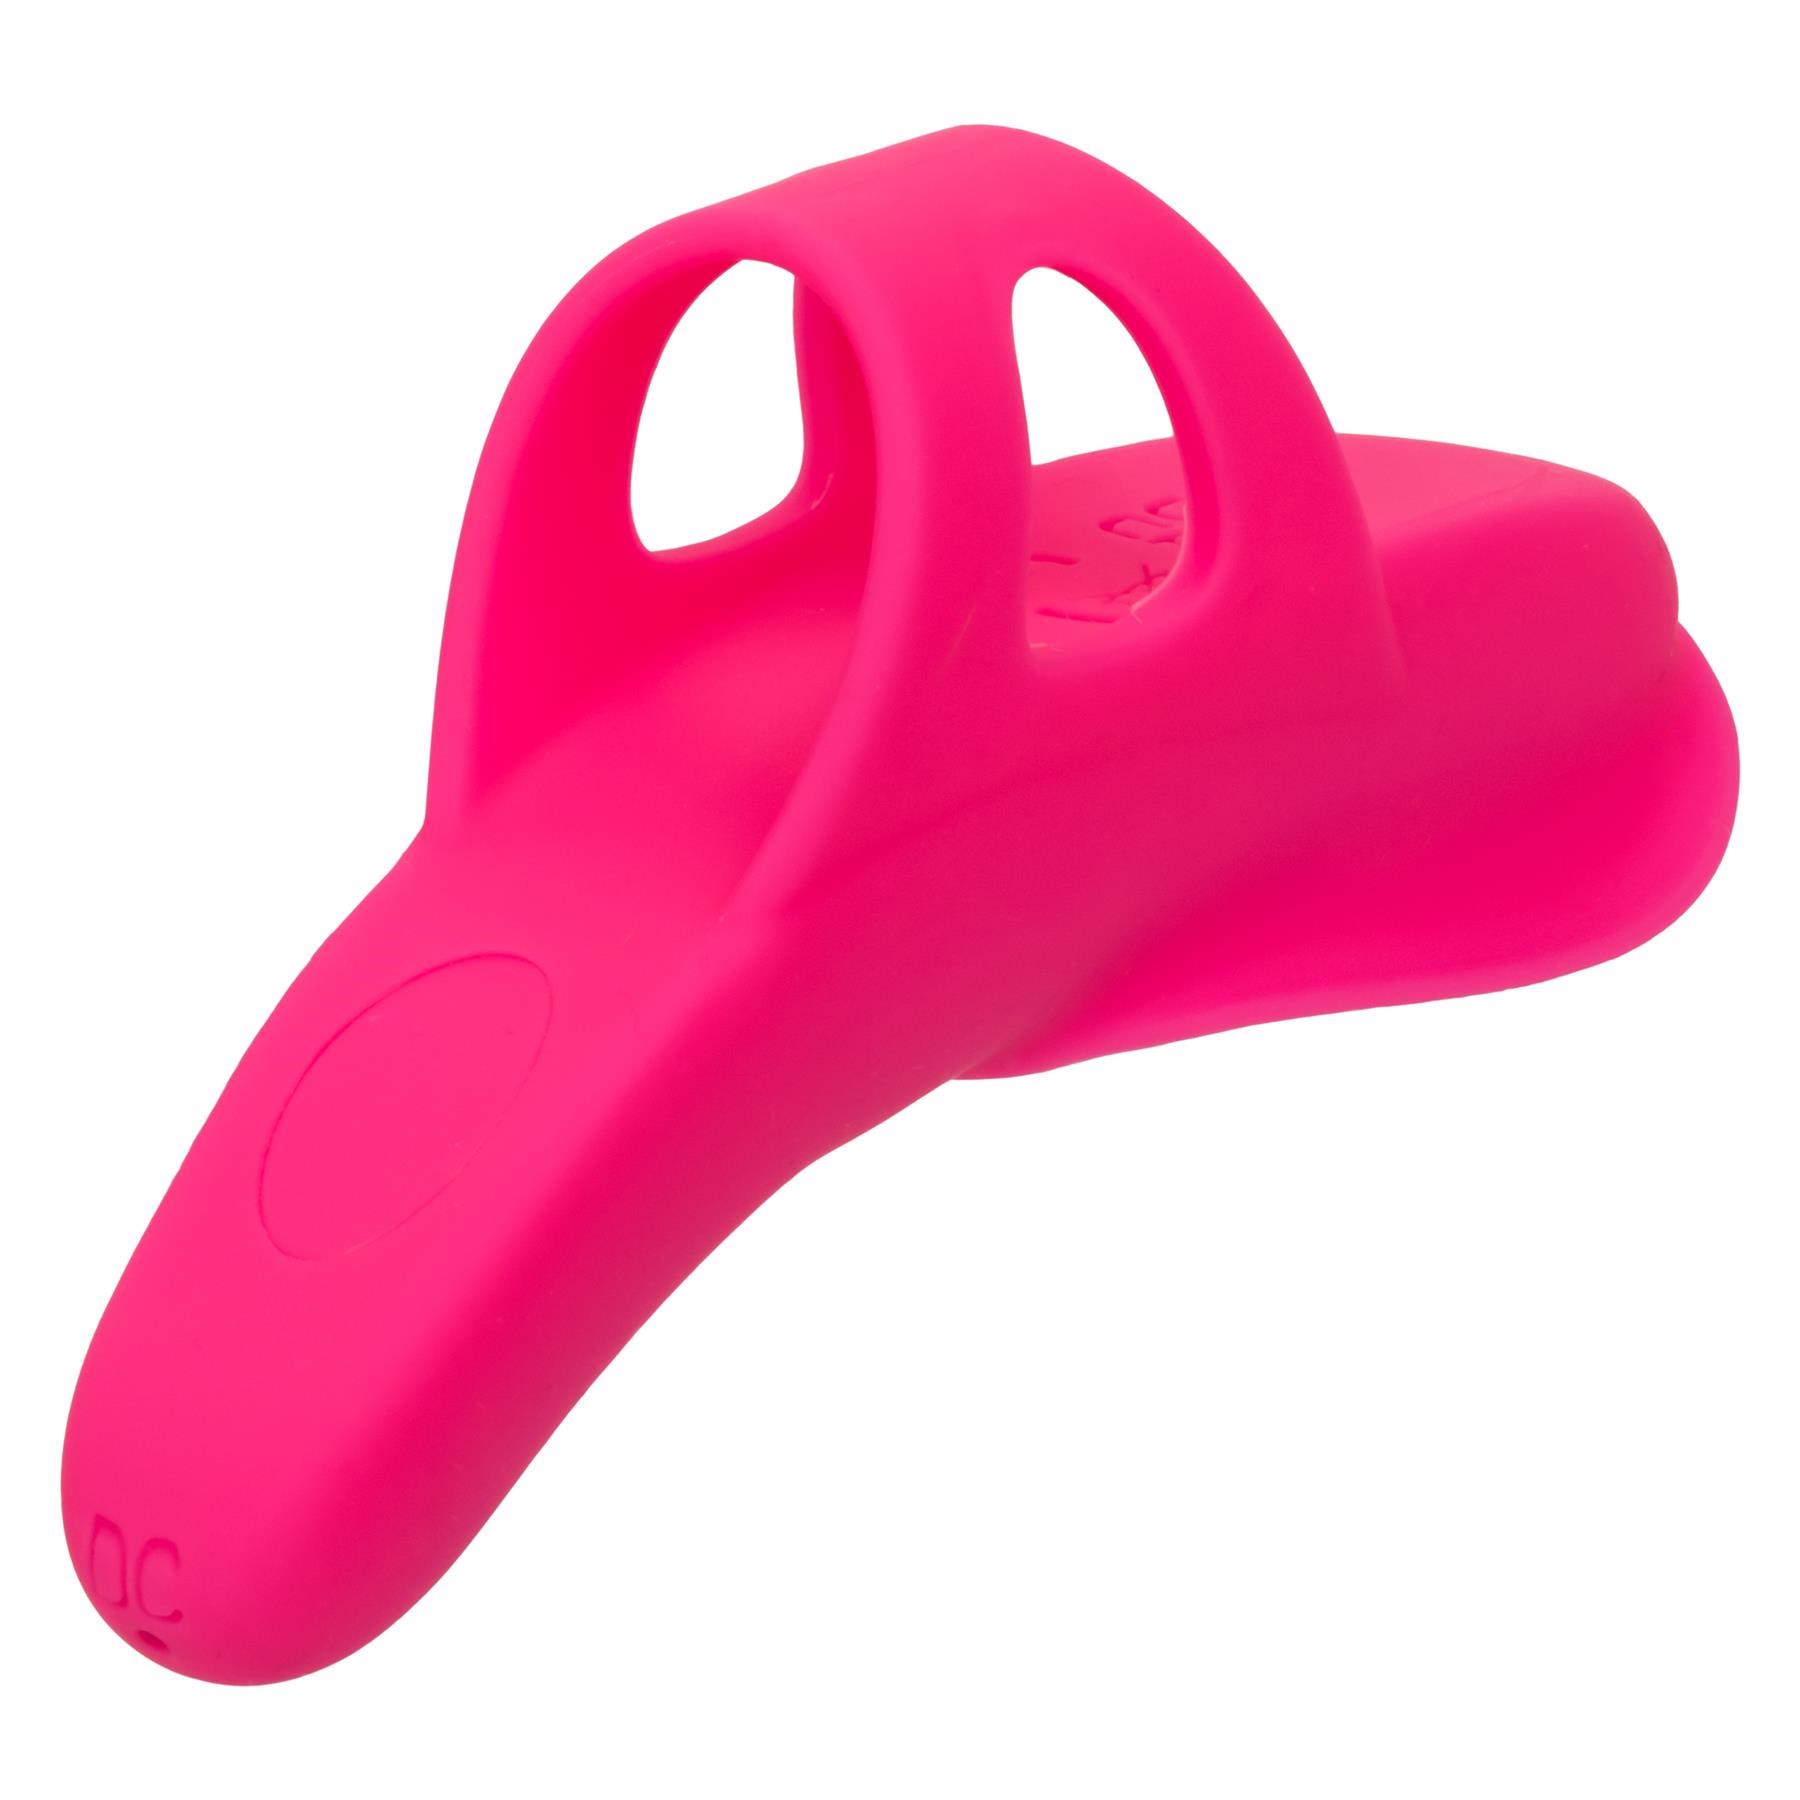 Neon Vibes The Nubby Finger Vibrator- Product Shot #5